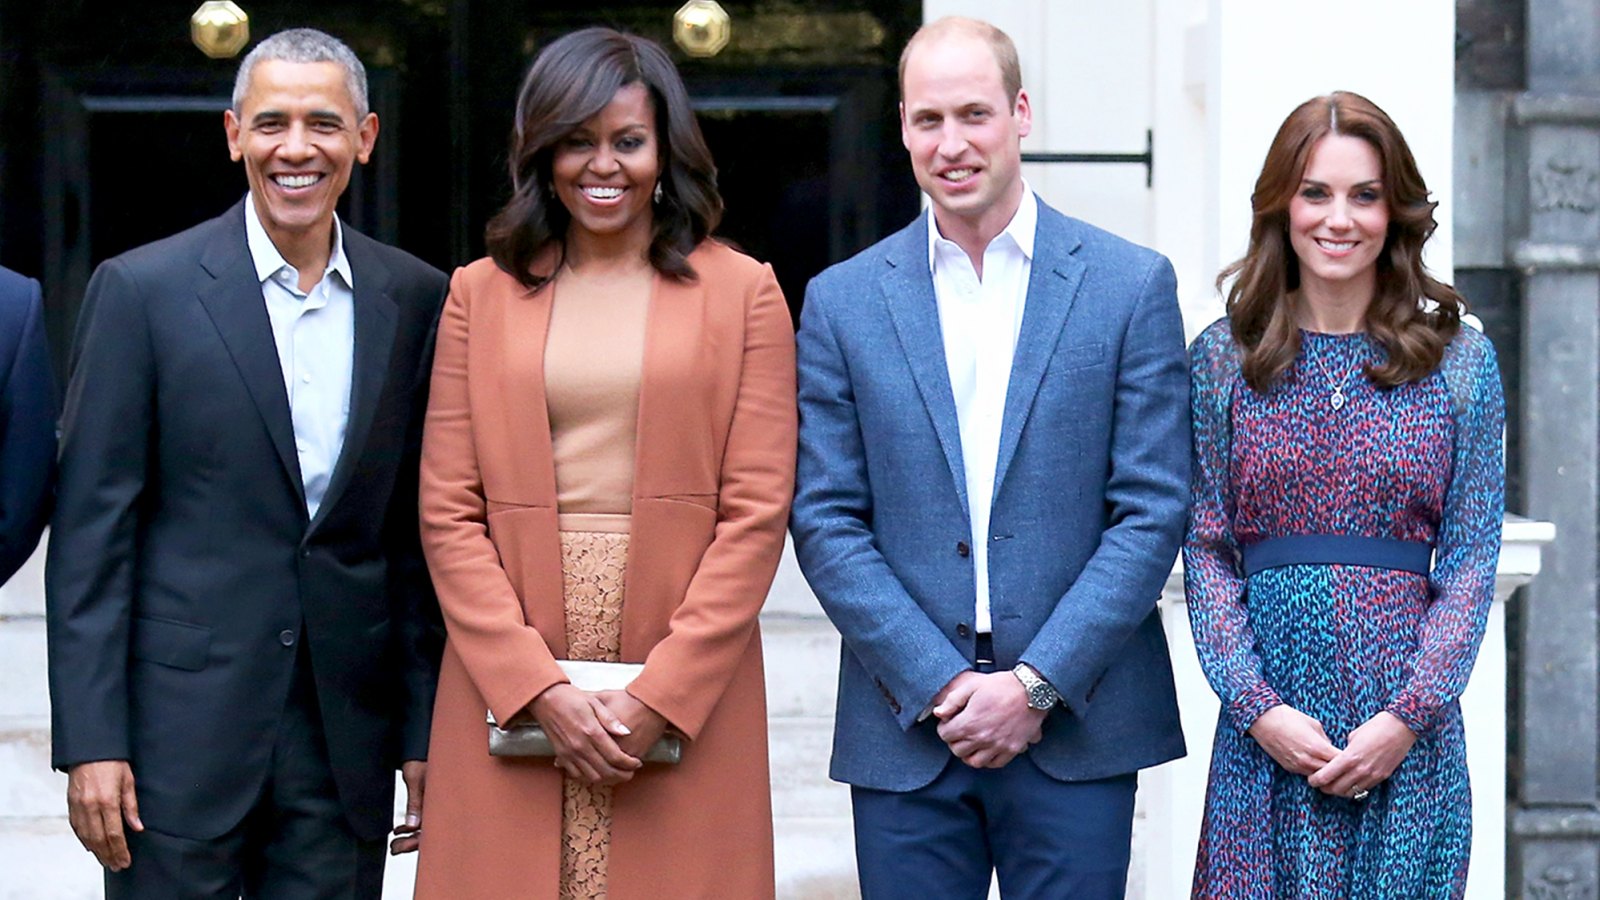 Barack Obama, Michelle Obama, Prince William and Kate Middleton attend a dinner at Kensington Palace on April 22, 2016 in London, England.